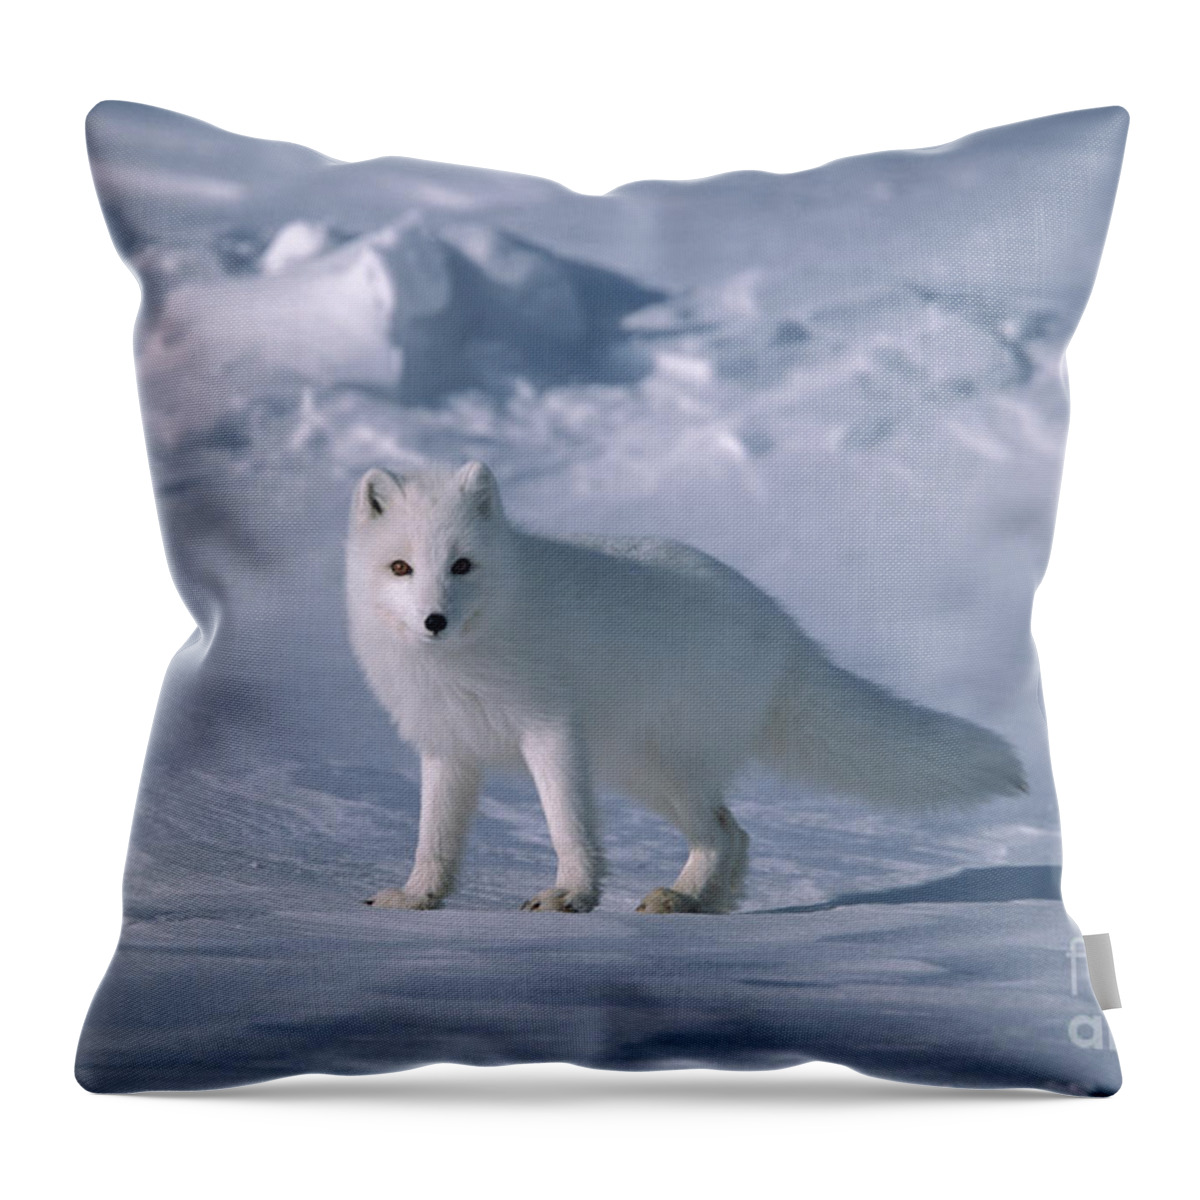 00342970 Throw Pillow featuring the photograph Arctic Fox on the North Slope by Yva Momatiuk John Eastcott